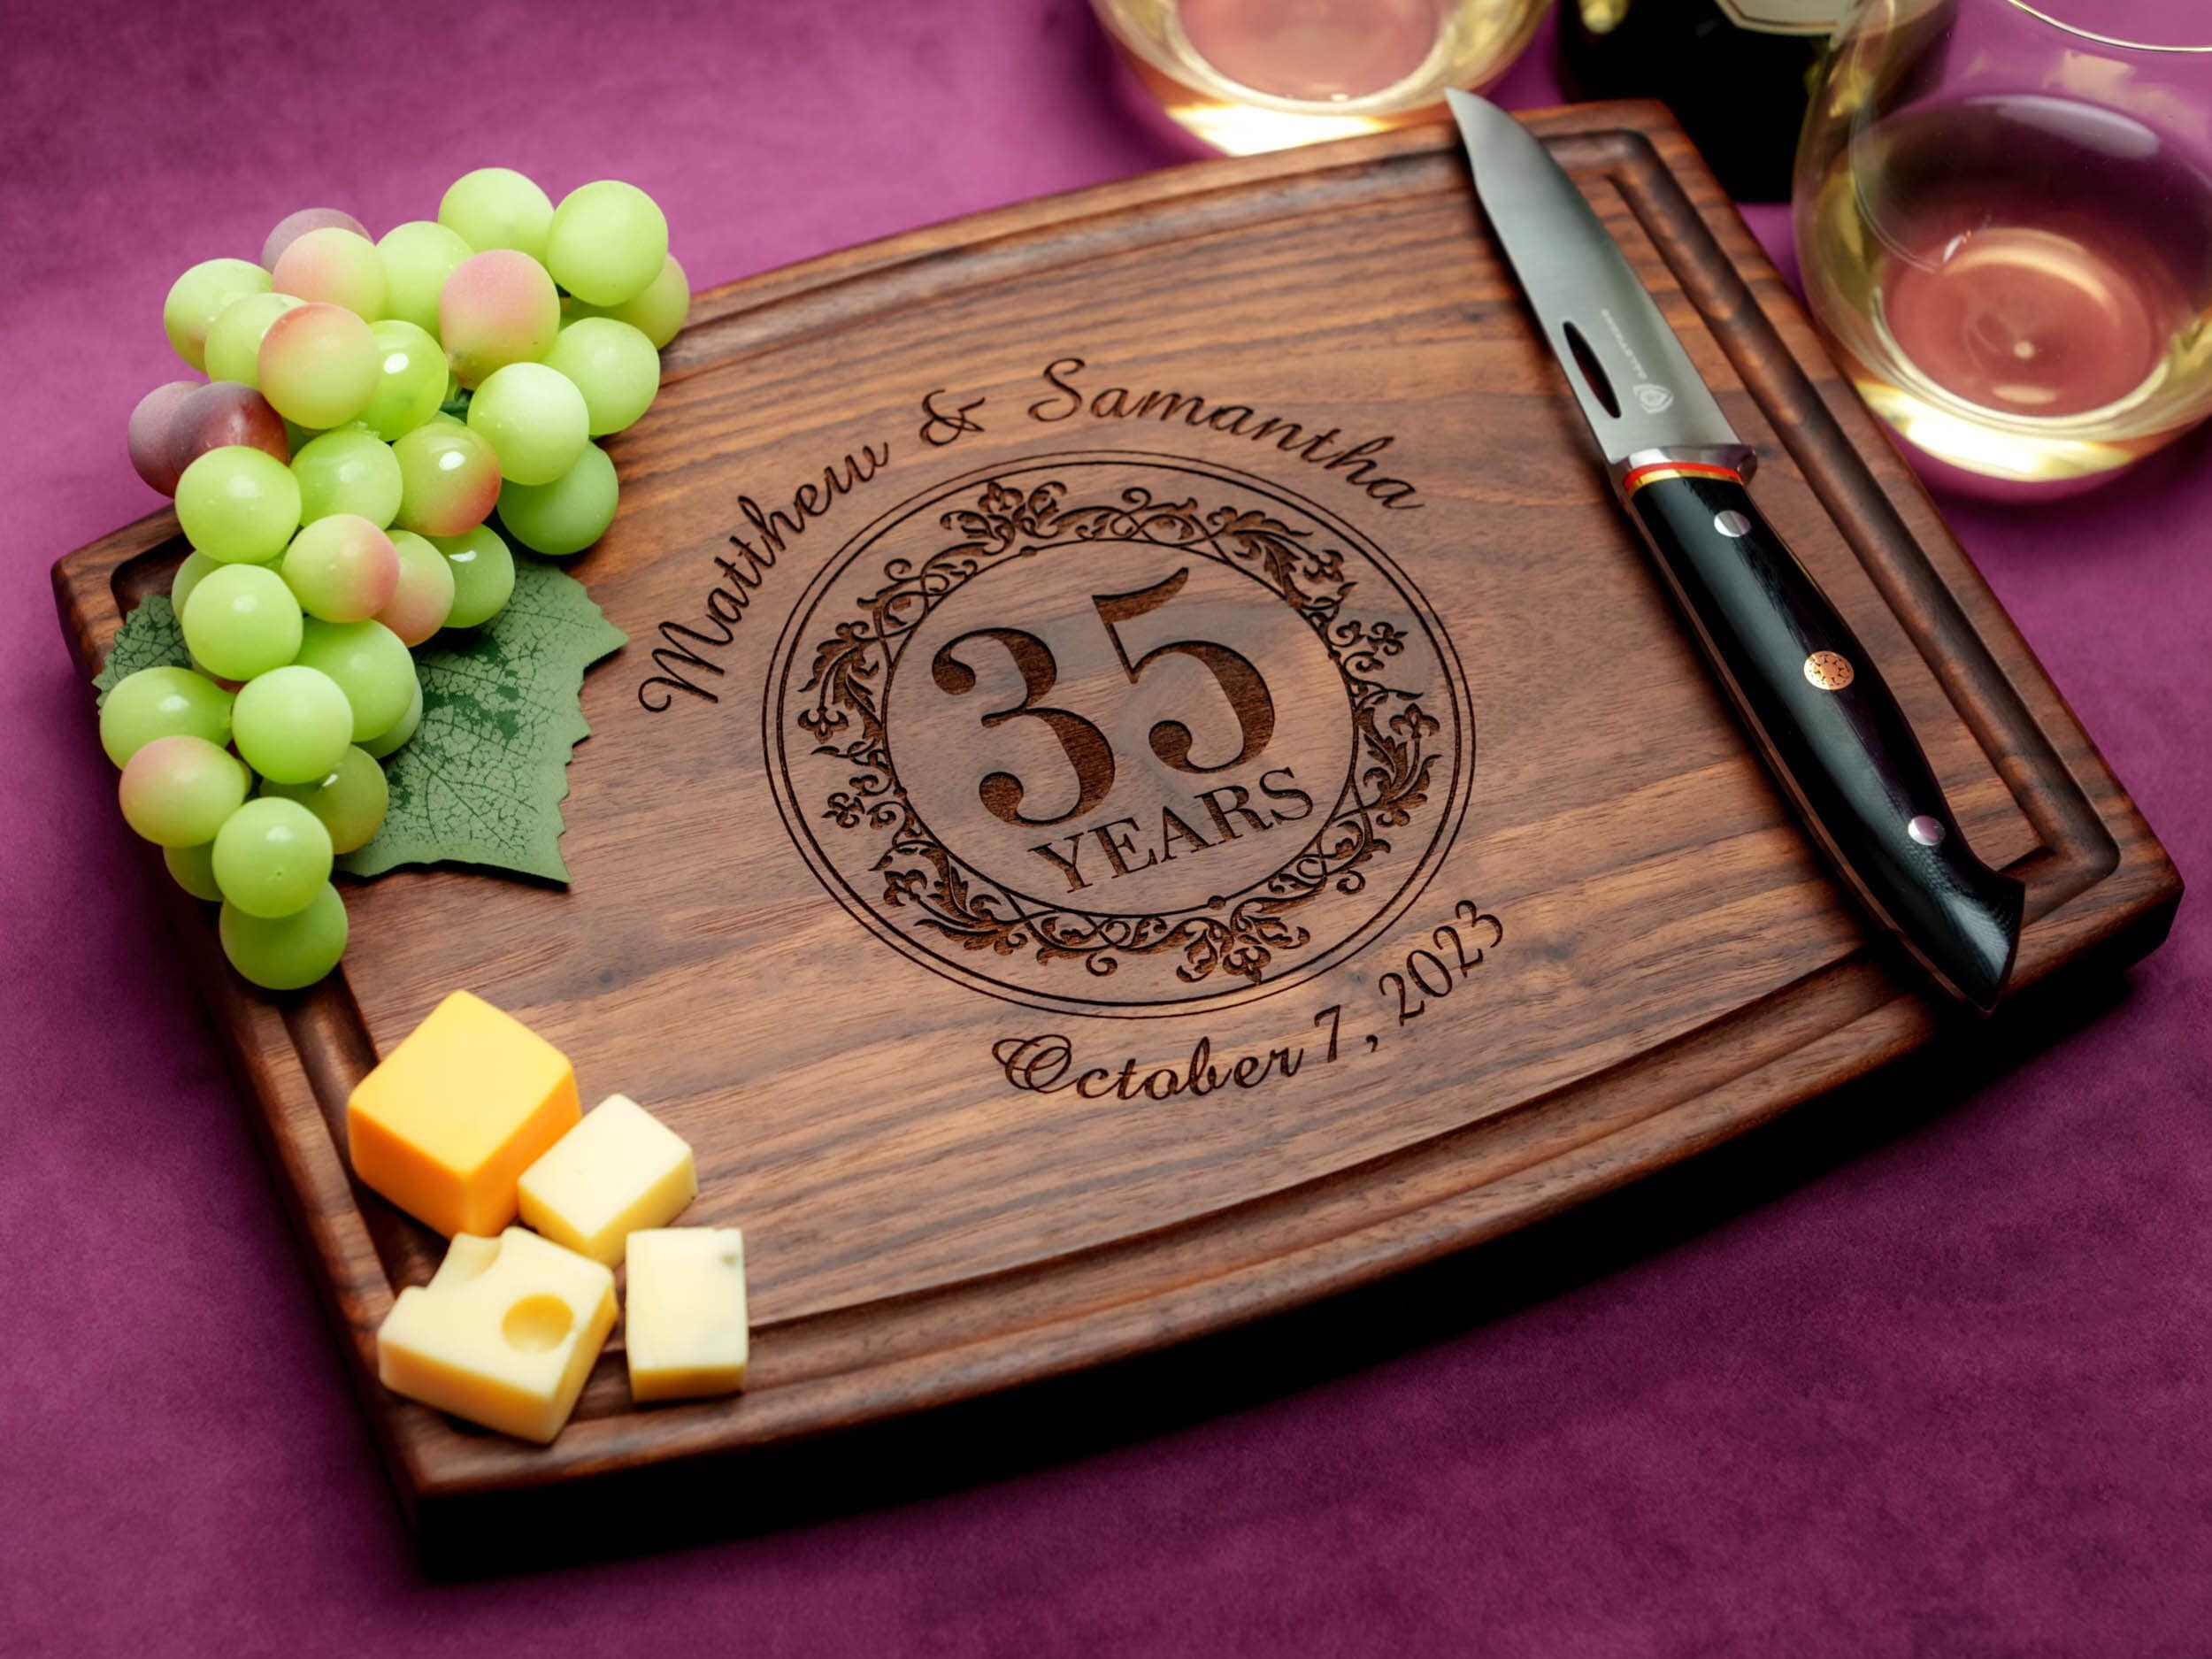 50th Wedding Anniversary Gifts For Couple - Custom Cheese Board Makes –